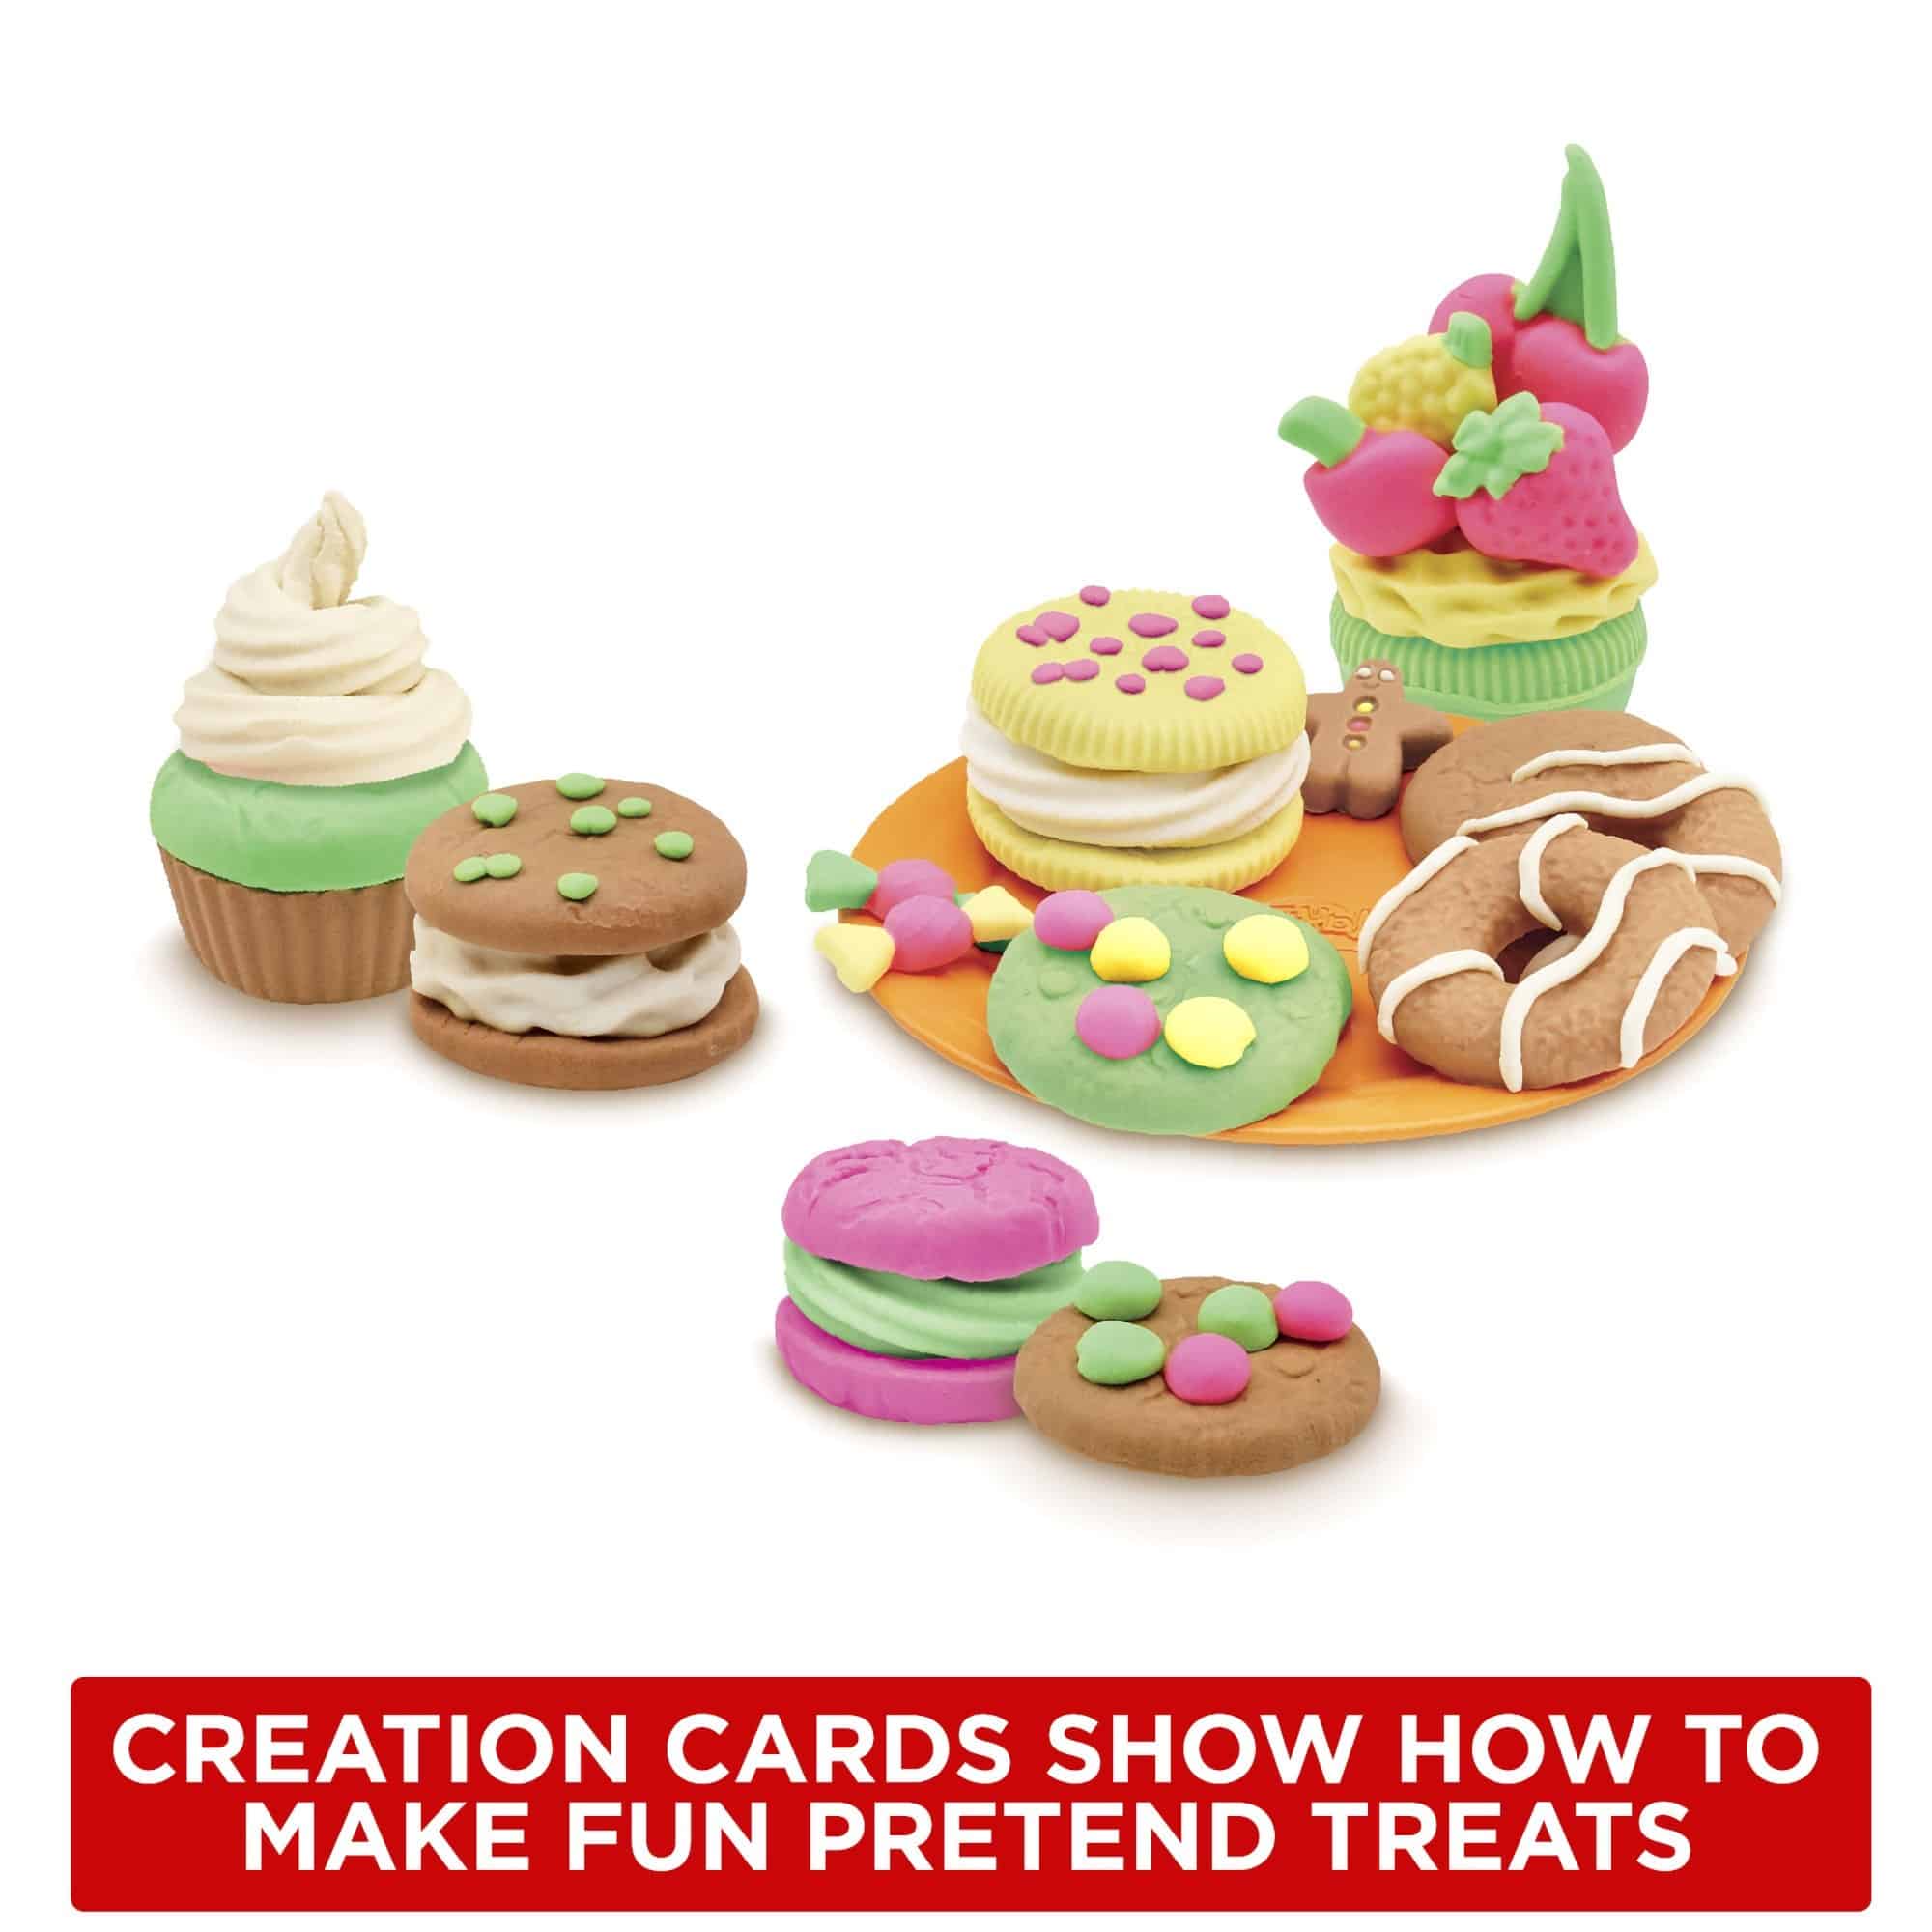 Play-Doh - Kitchen Creations - Spinning Treats Mixer